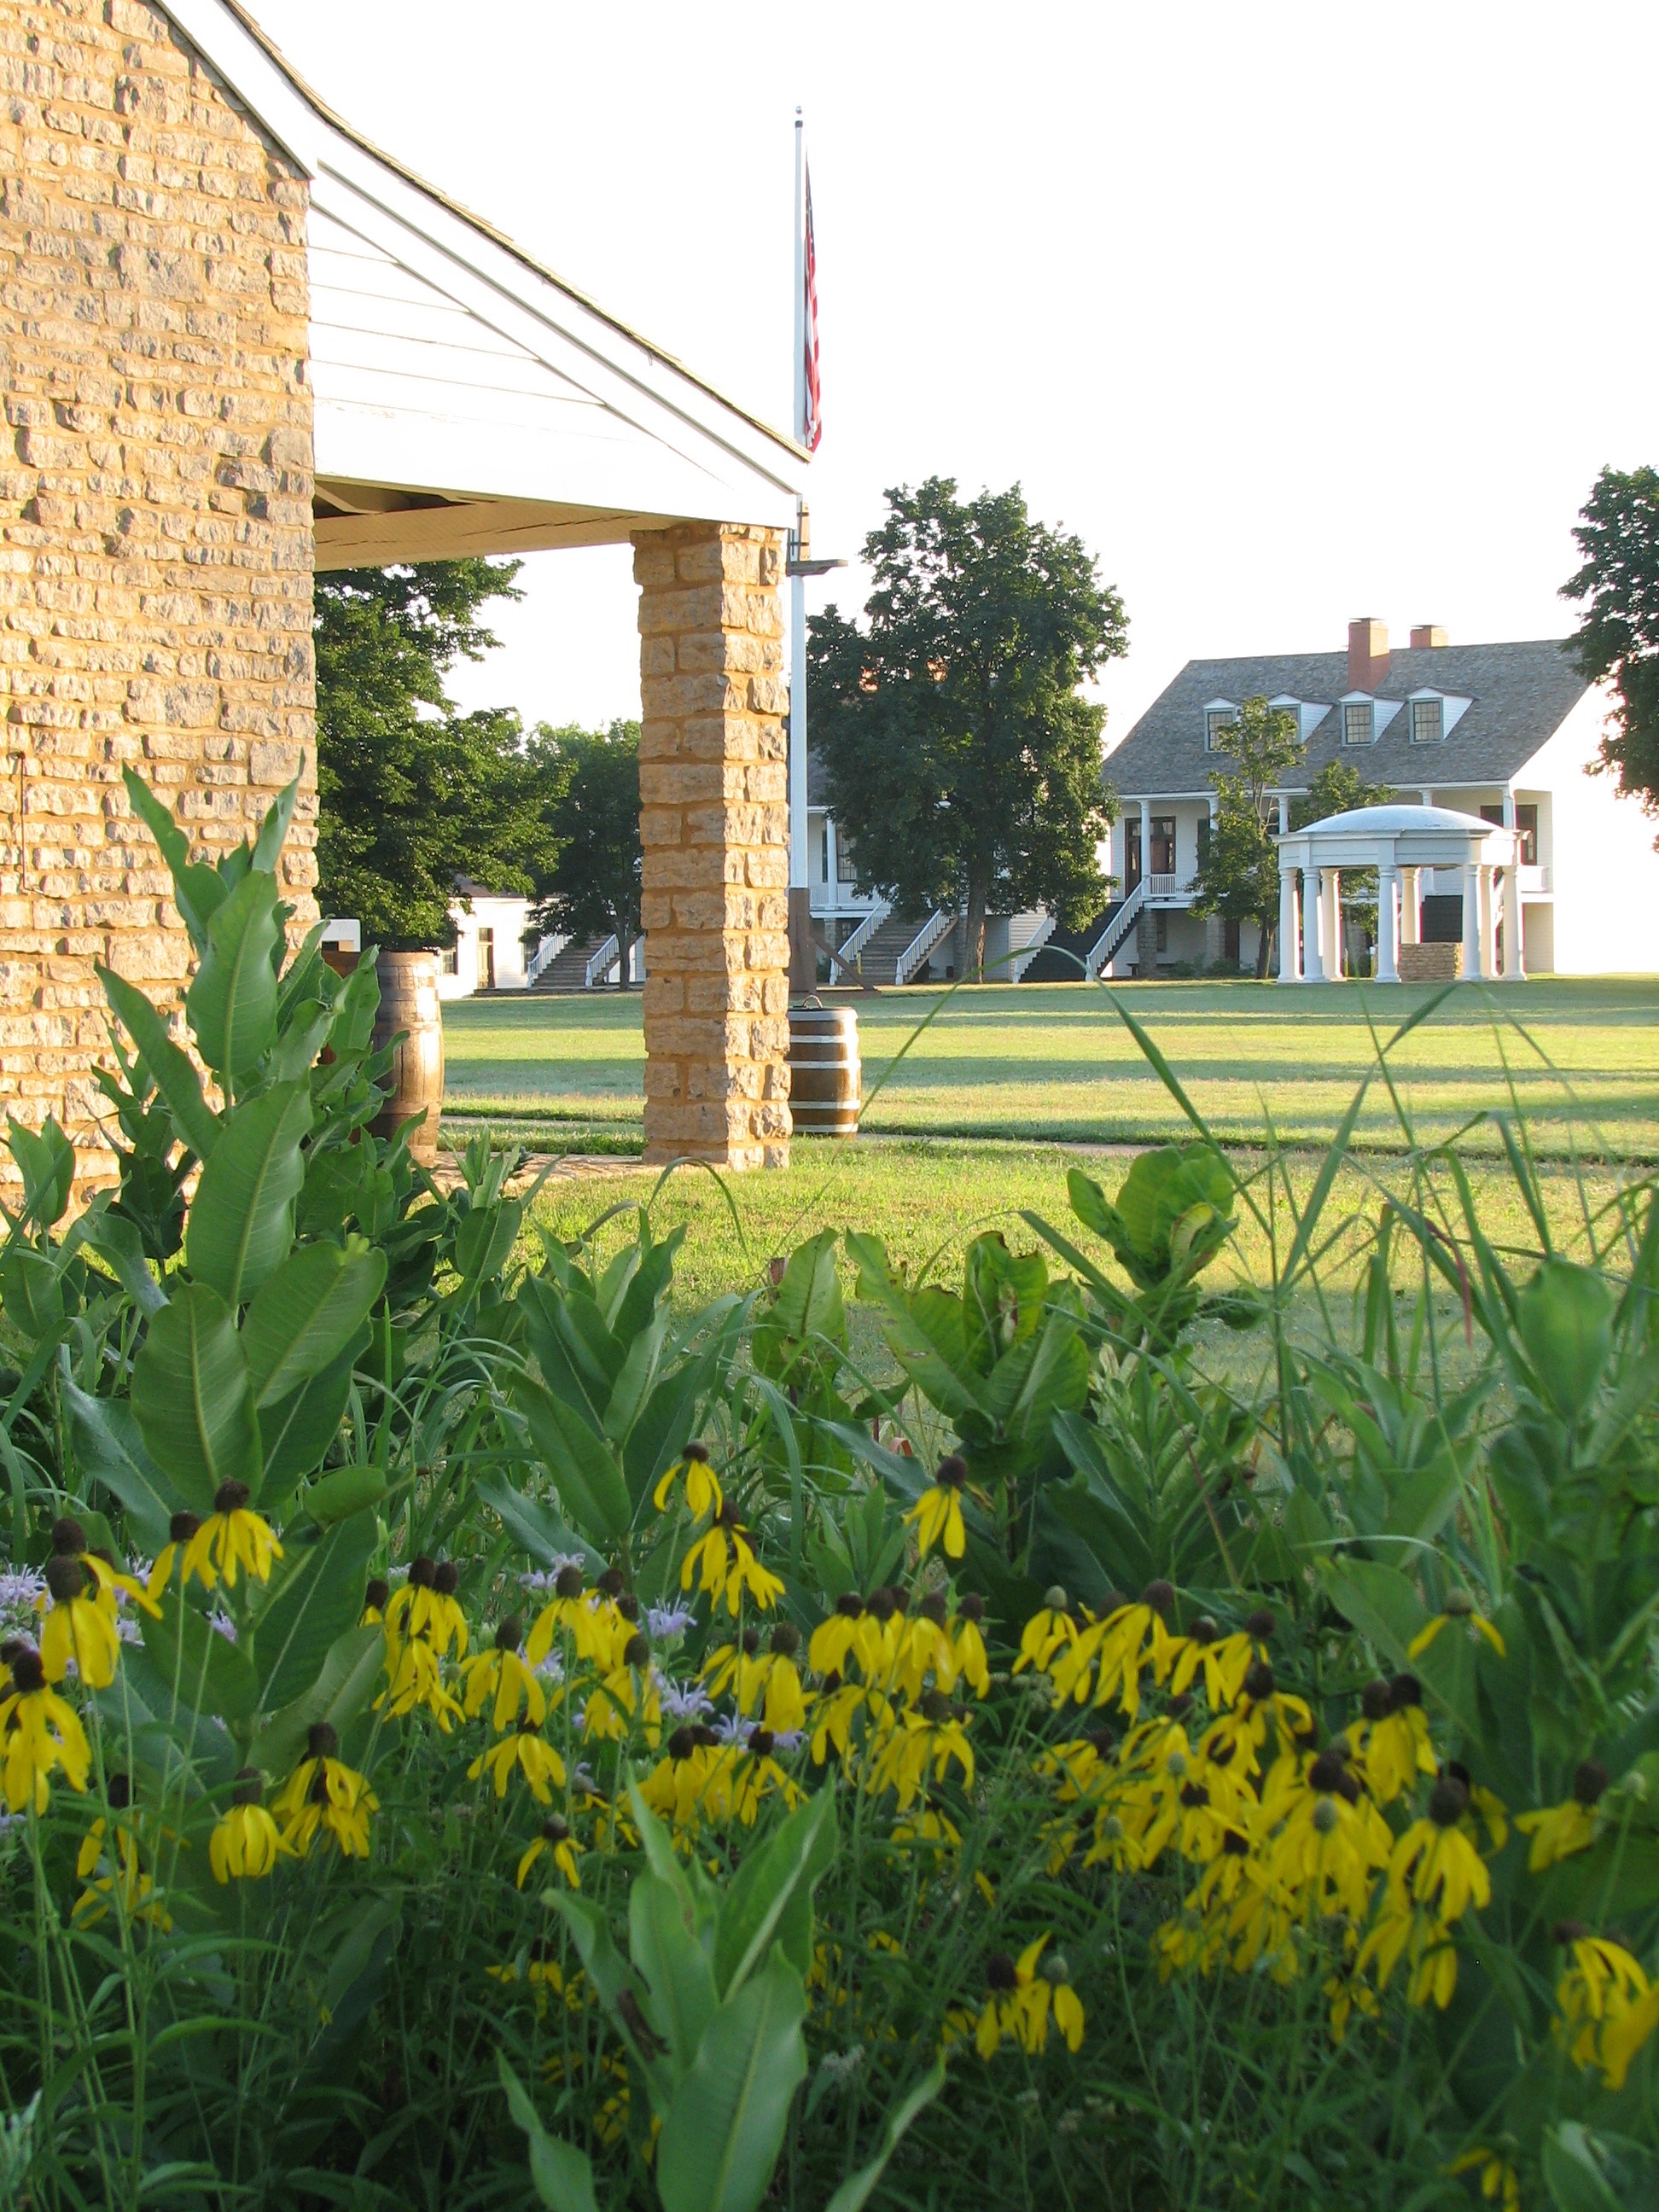 A field of sunflowers next to a stone building.  Wood frame structures in background.